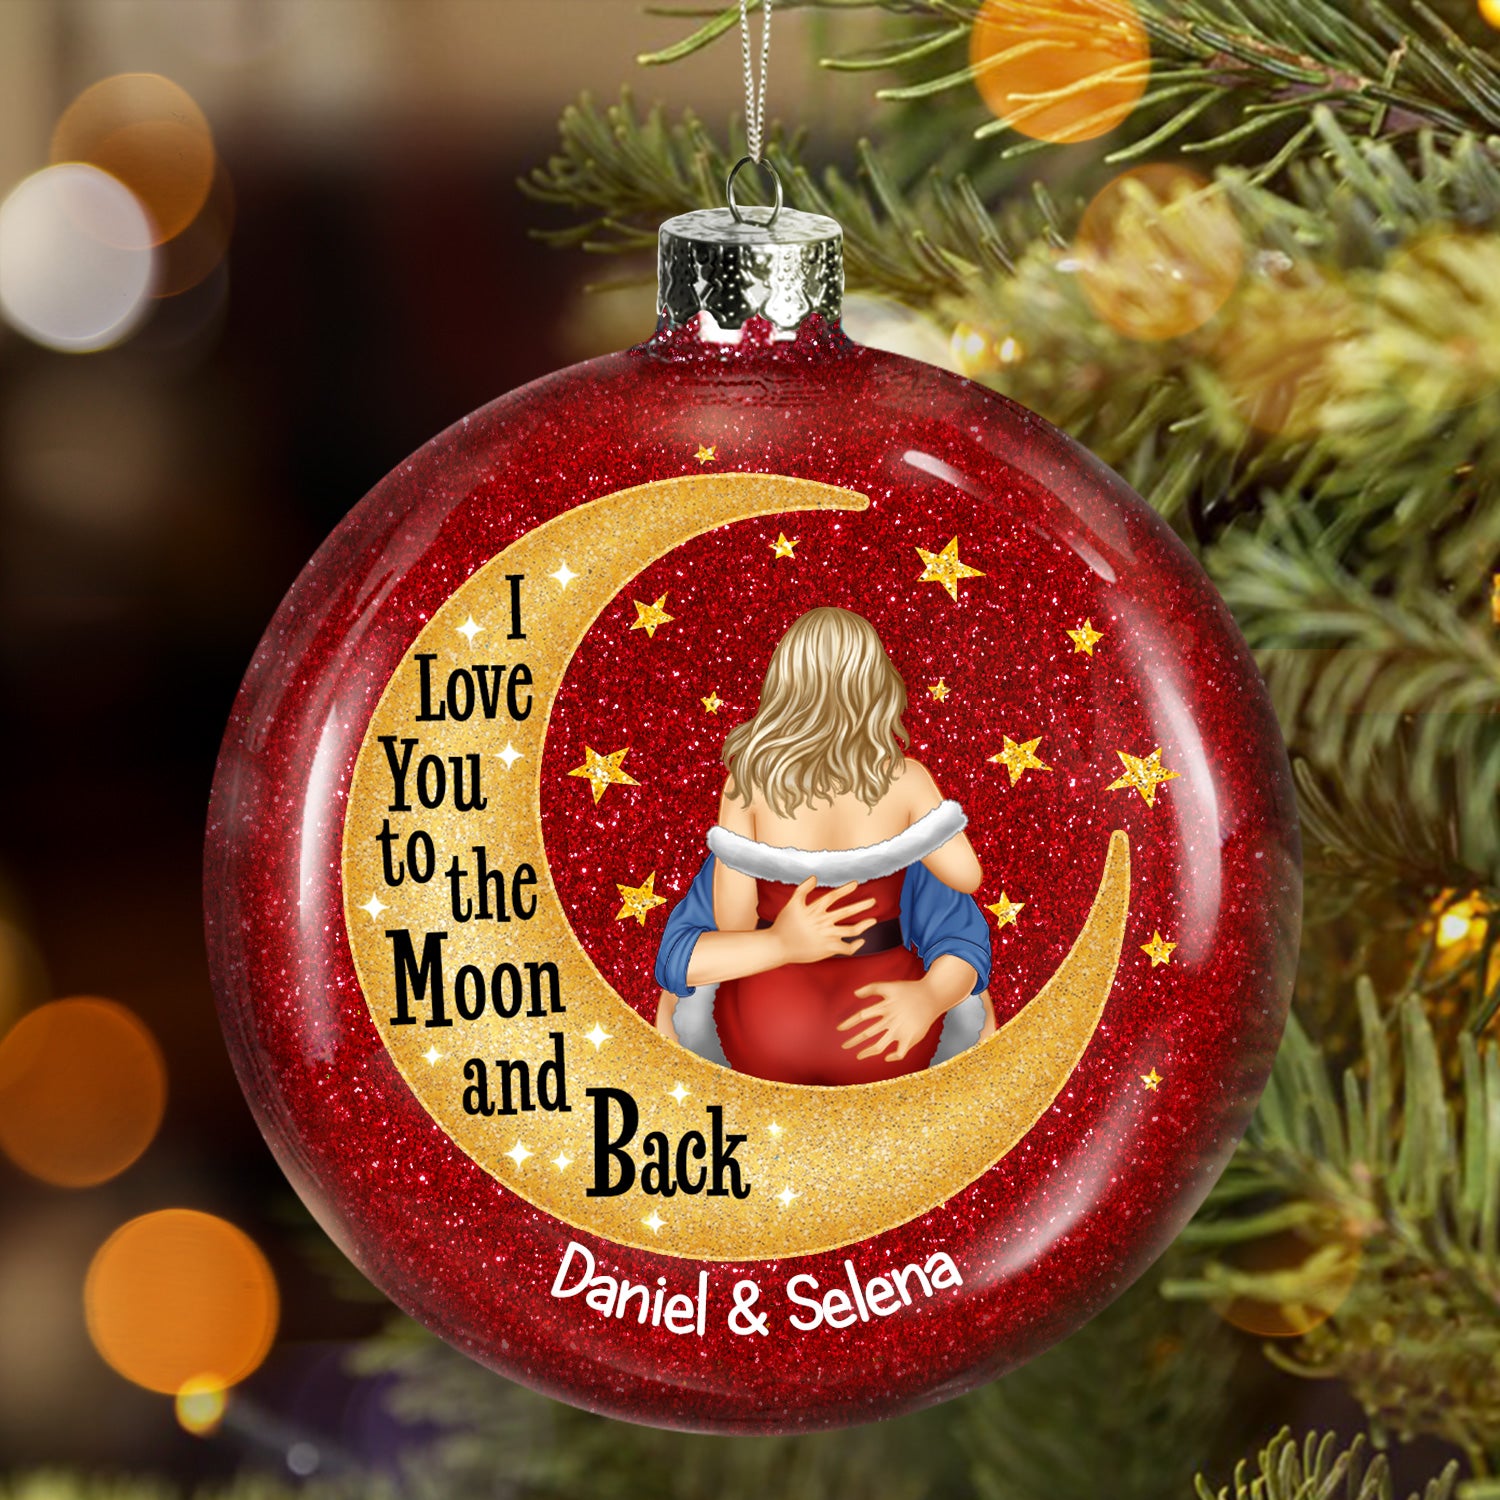 I Love You To The Moon And Back - Christmas Gift For Couples, Husband And Wife - Personalized Glitter Plastic Ornament